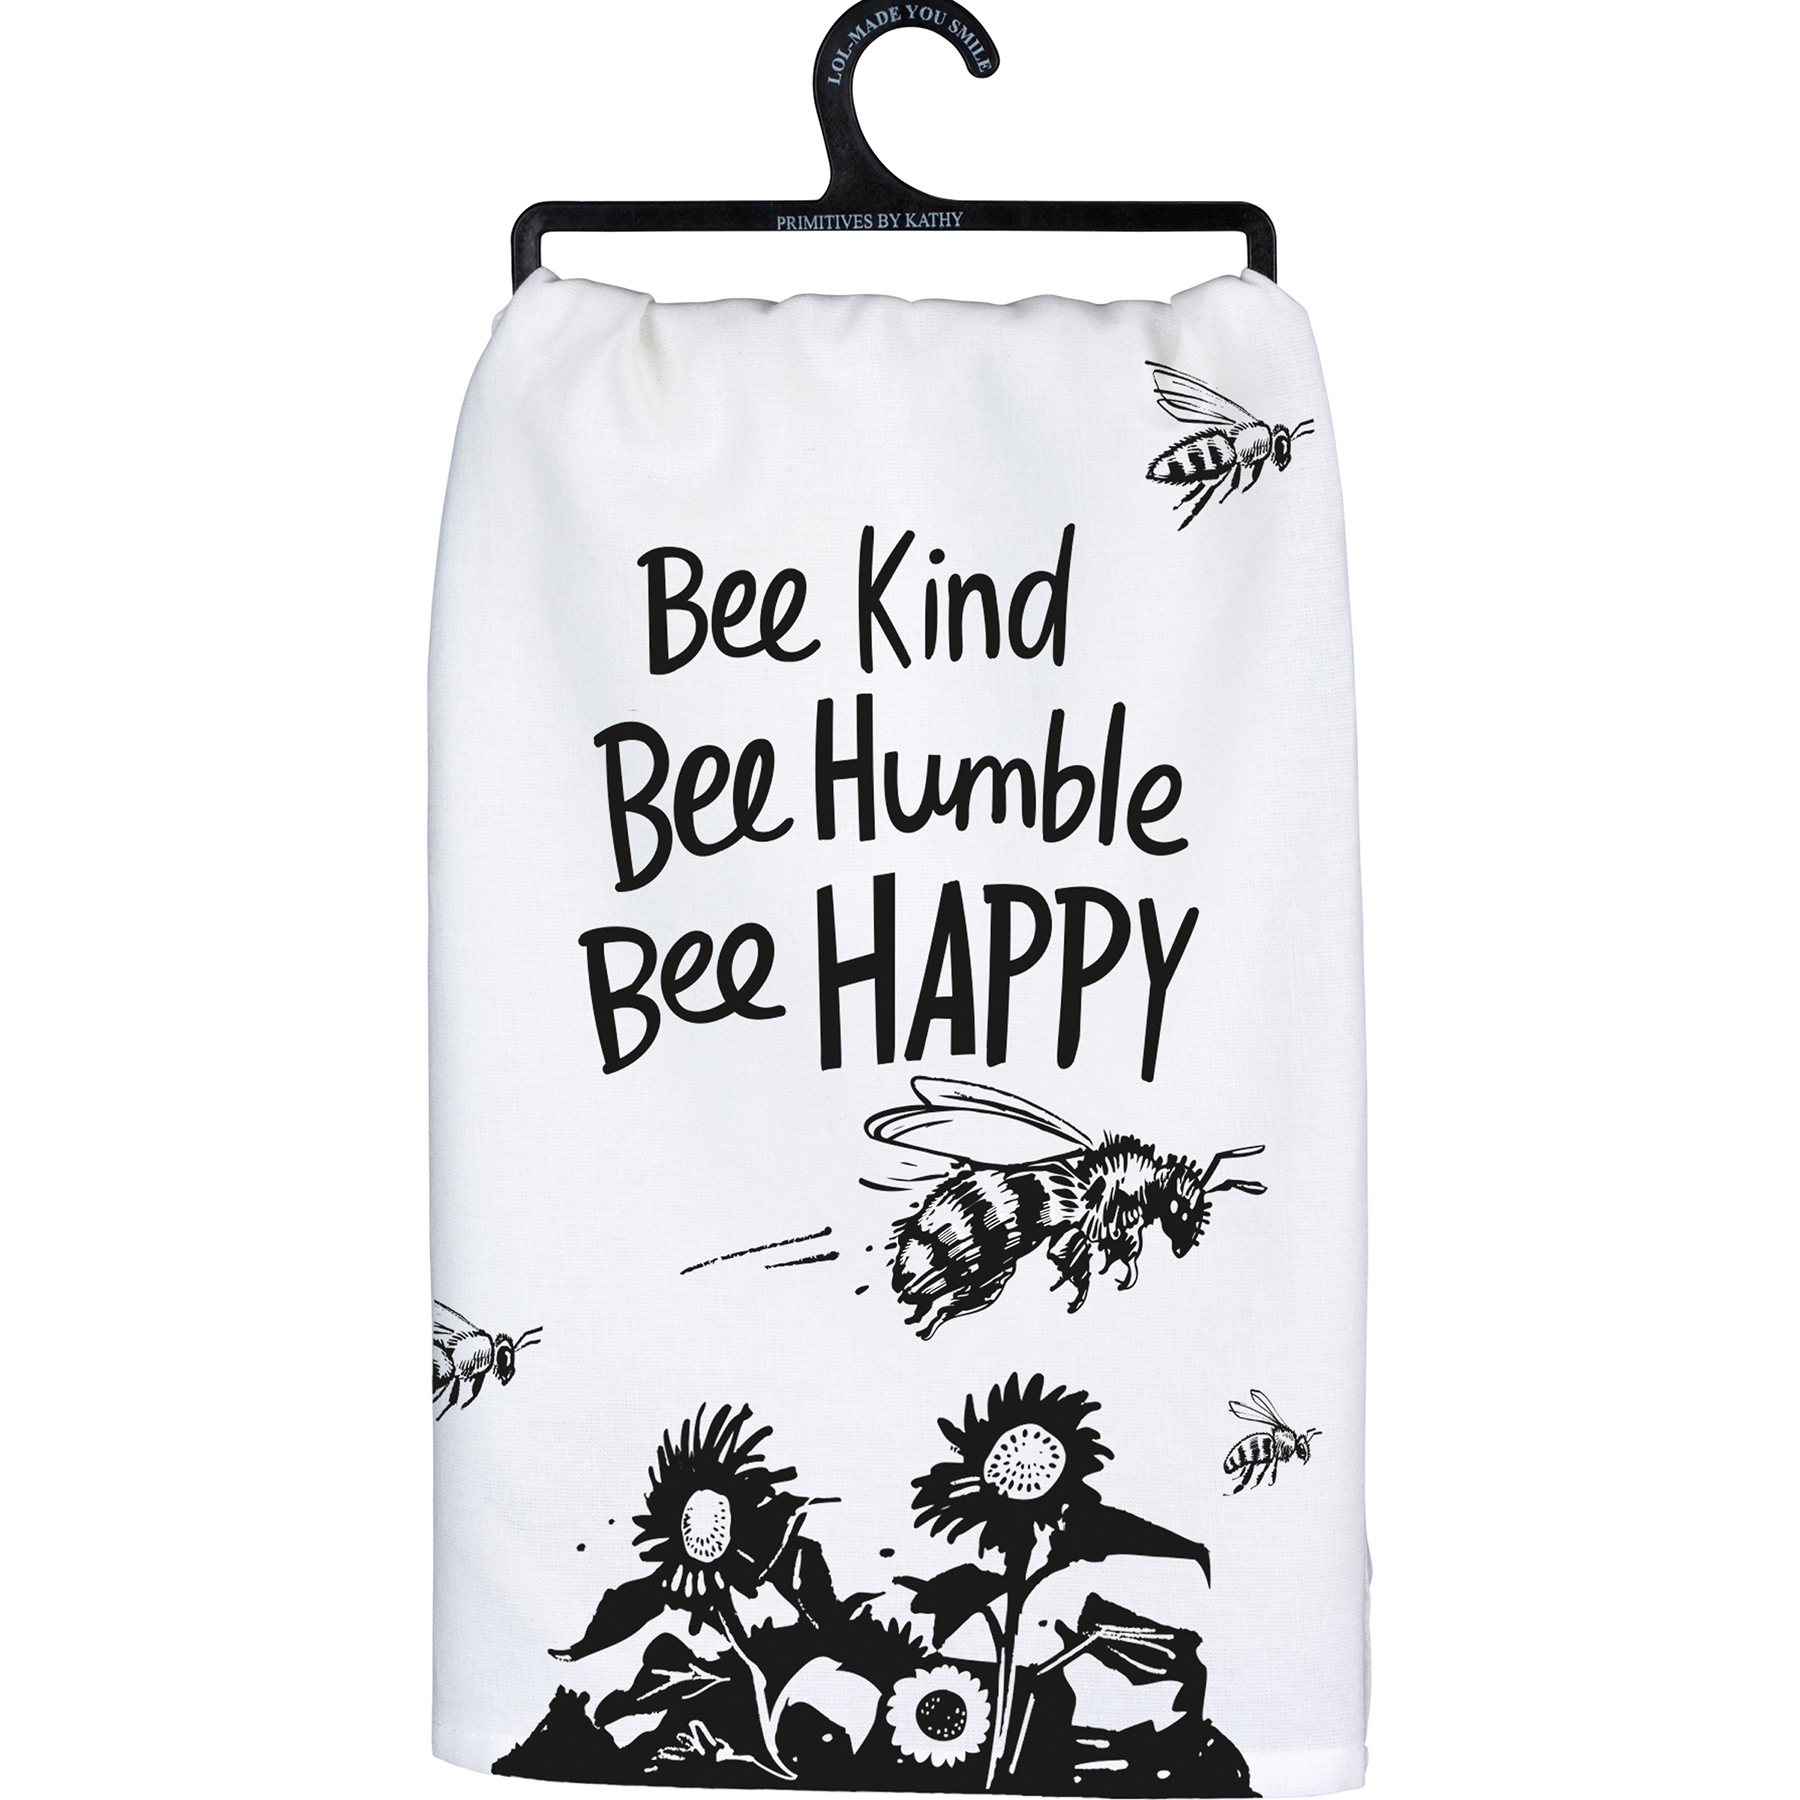 Primitives by Kathy It's The Most Wonderful Time Of The Year Halloween Cotton LOL Towel